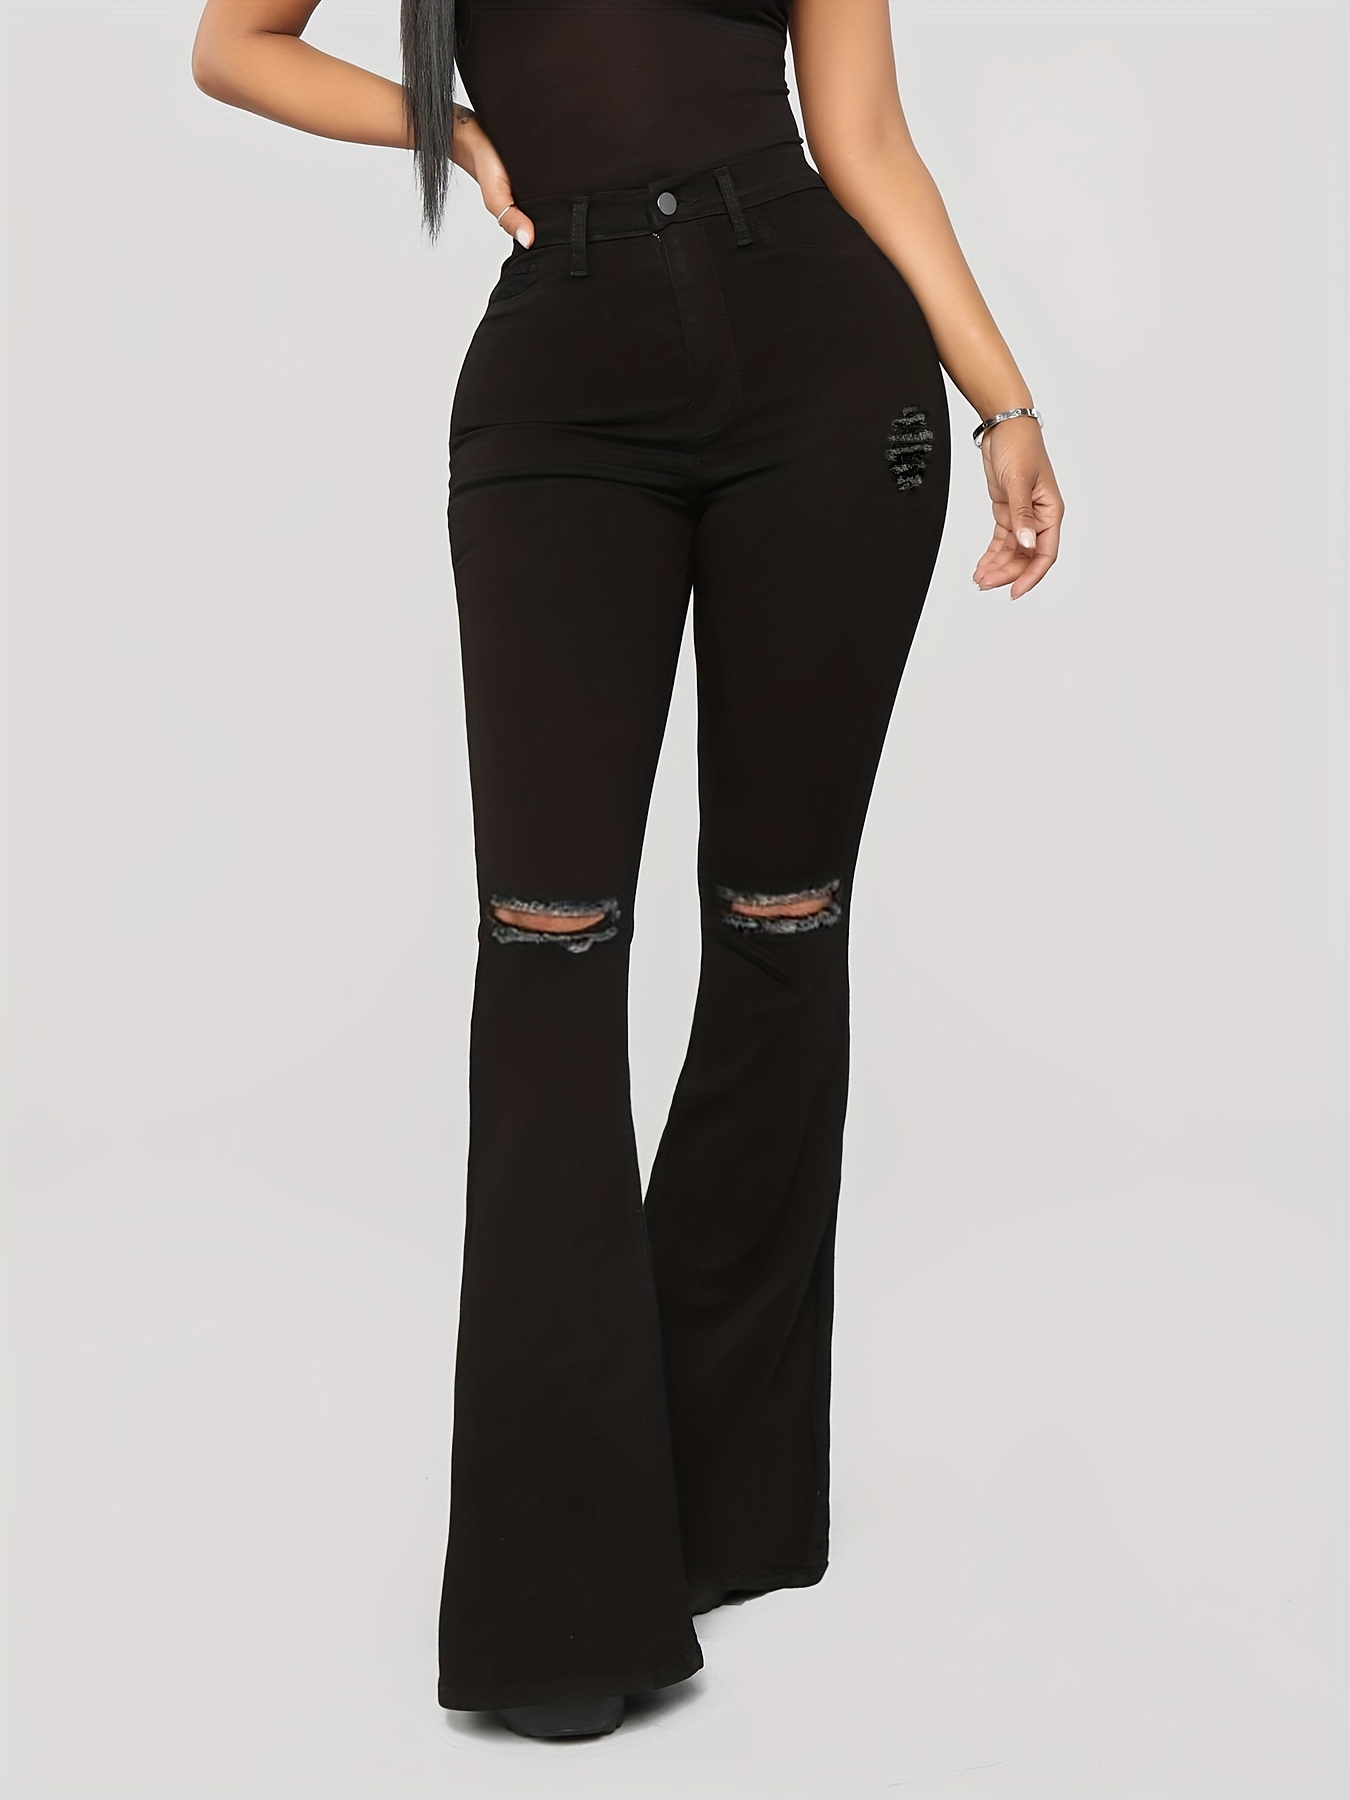 Women's Curvy High-Rise Ripped Black Flare Jeans, Women's Bottoms